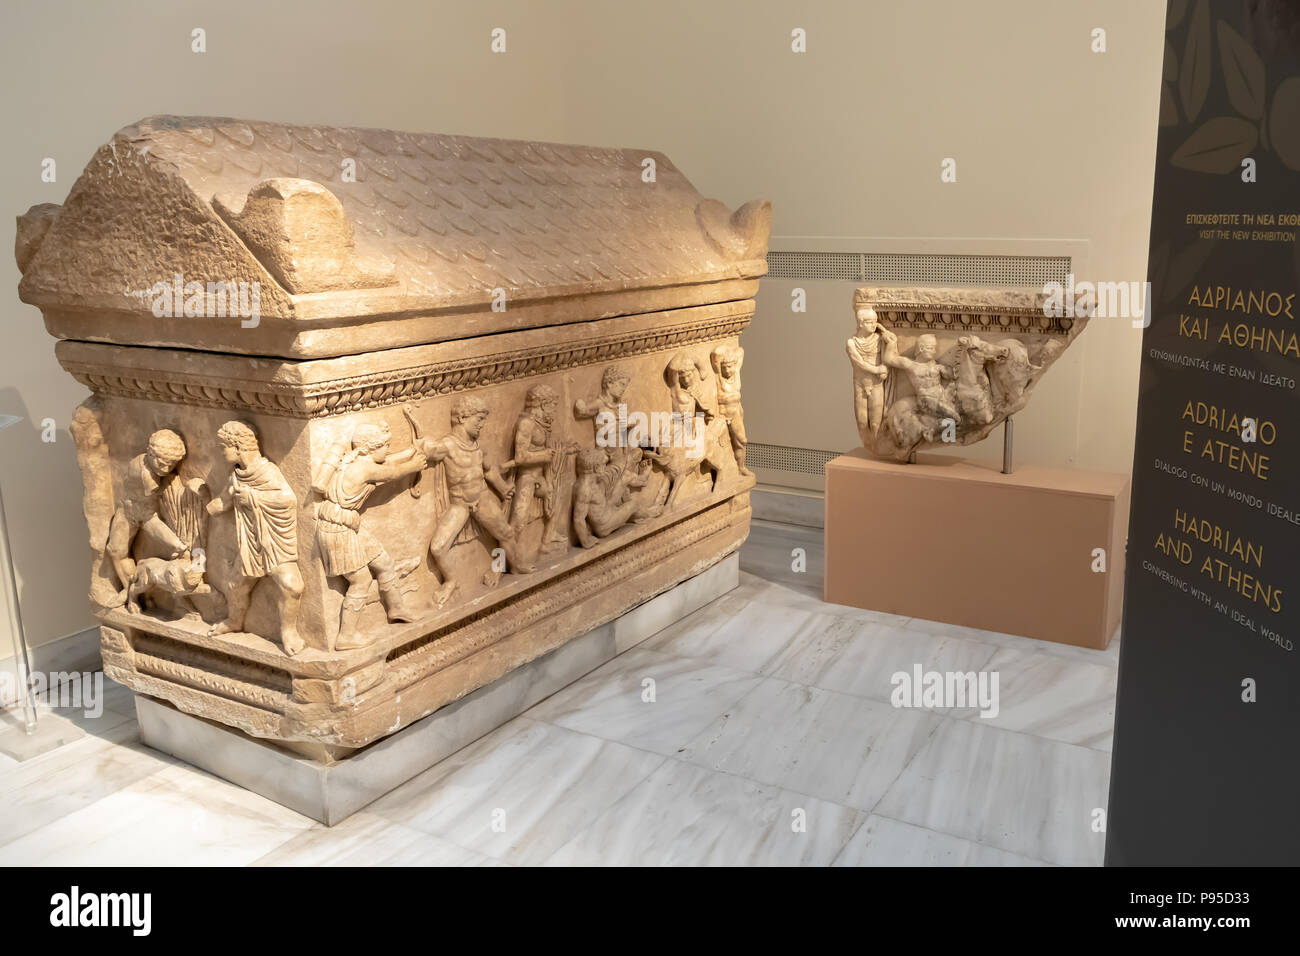 Attic Sarcophagus, Pentelic Marble, Calydonian Boar Hunt, Found in Aysios Ioannis, Patras, Attica, Two young men confronting a lion. 150-170 AD. Stock Photo